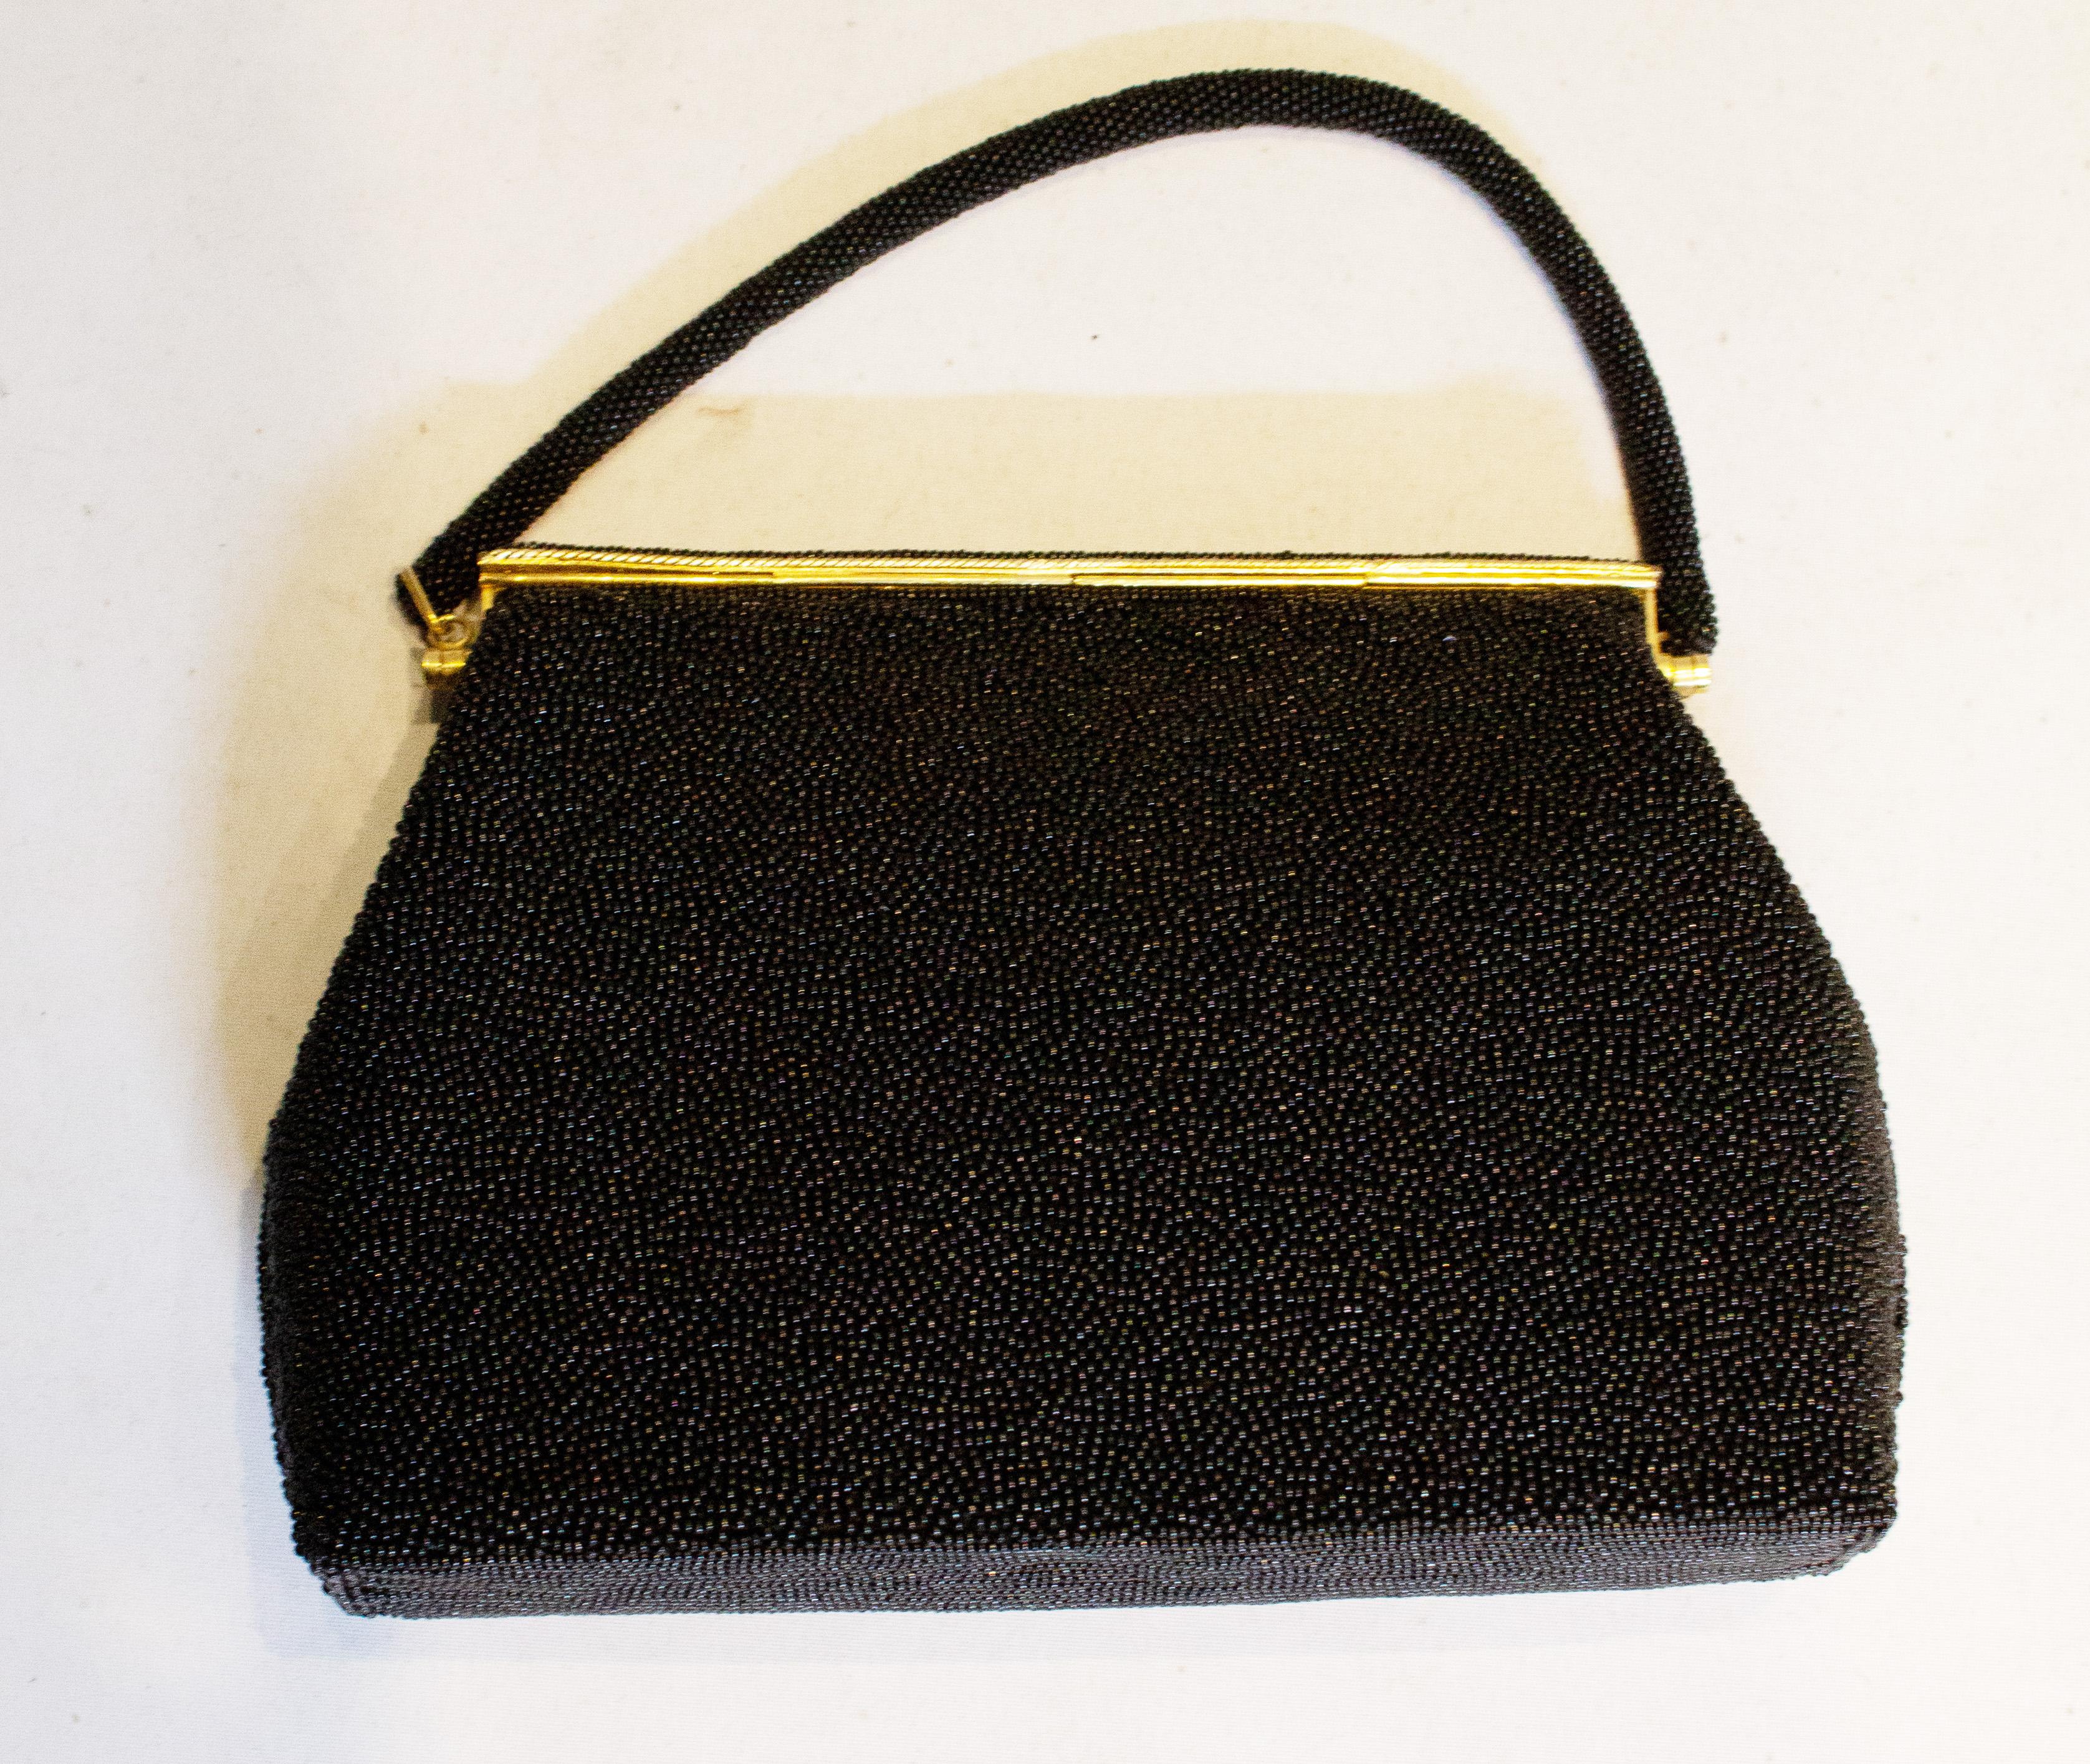 A pretty and unusual vintage handbag. The bag has a black beaded body apart from the front which has  a floral stitch design. It has a flapover clasp, and there is one internal pouch pocket. Measurement: width 10'', height 7''. depth 2'', strap 13''